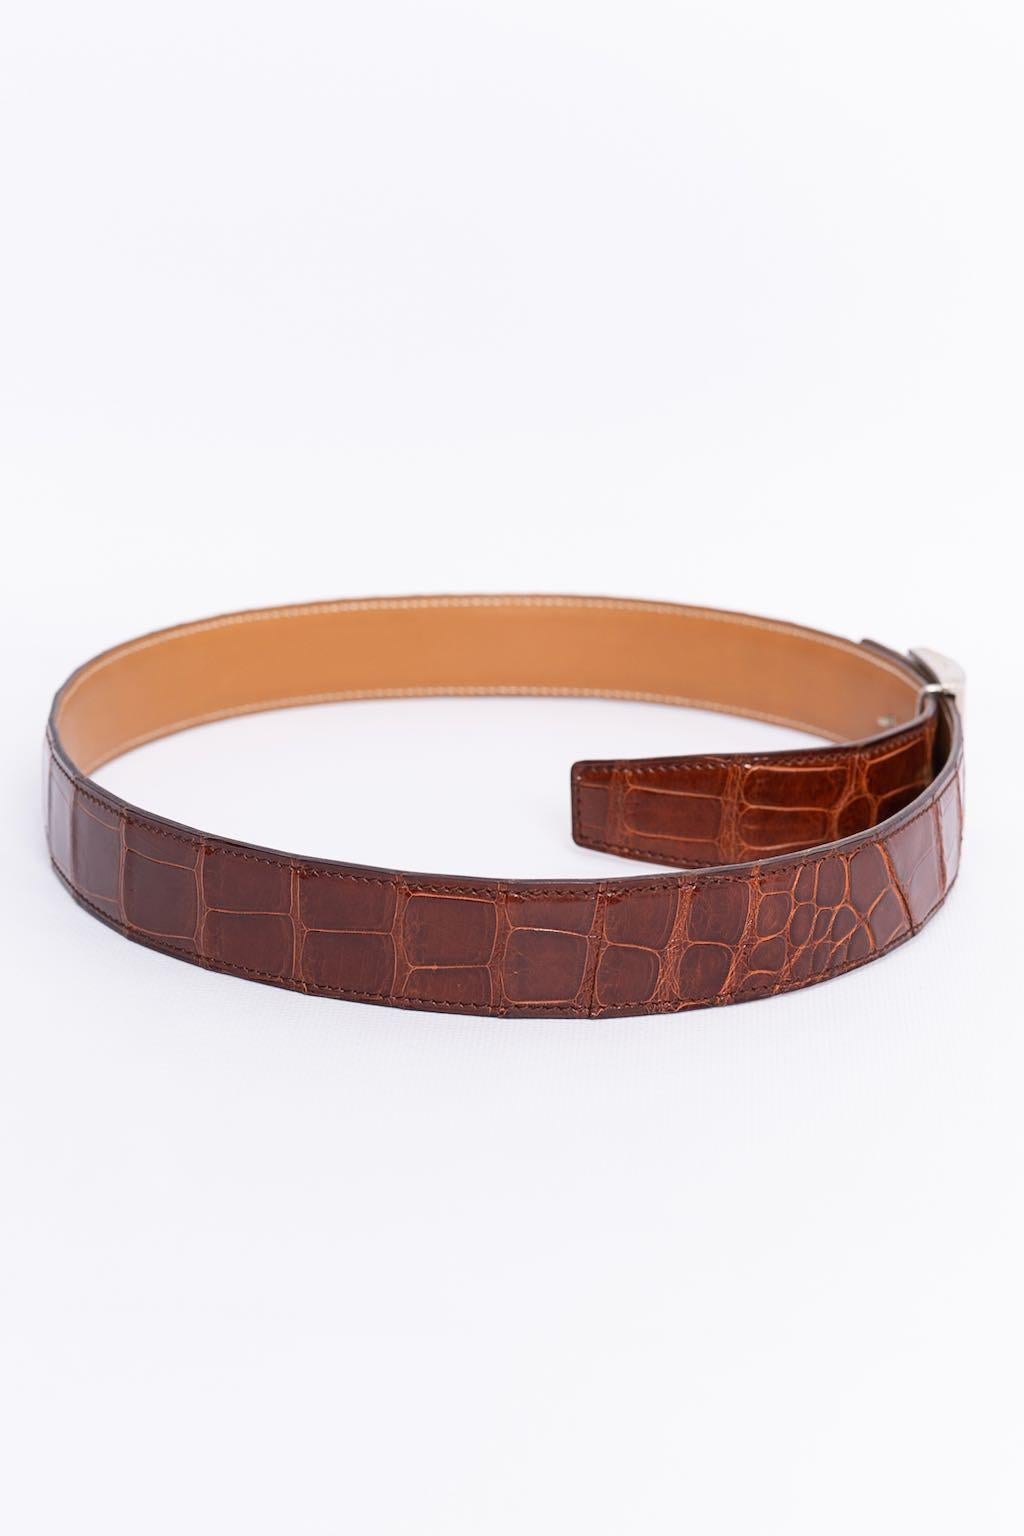 Women's or Men's Hermes Belt in Crocodile and Brown Leather